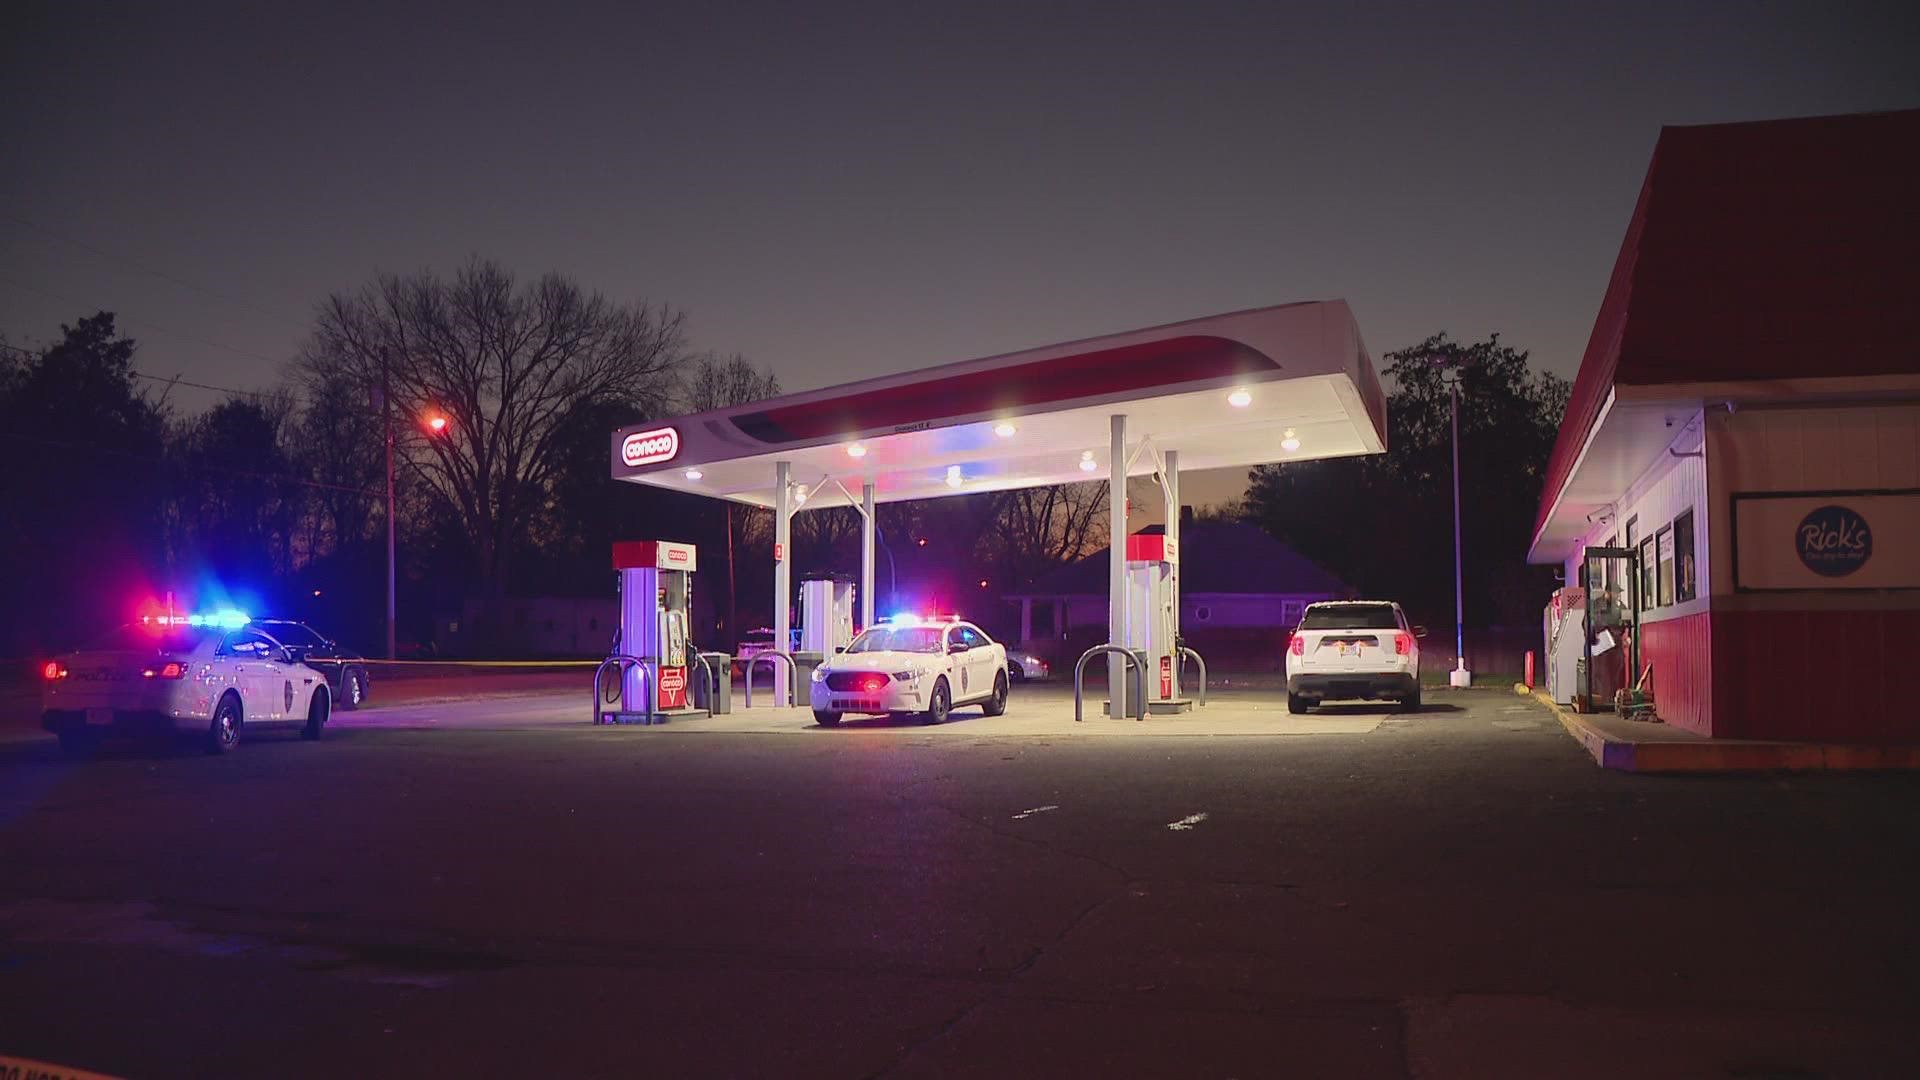 Anderson Police were called to the Conoco station at 1002 Nichol Avenue around 5:45 p.m. Wednesday.